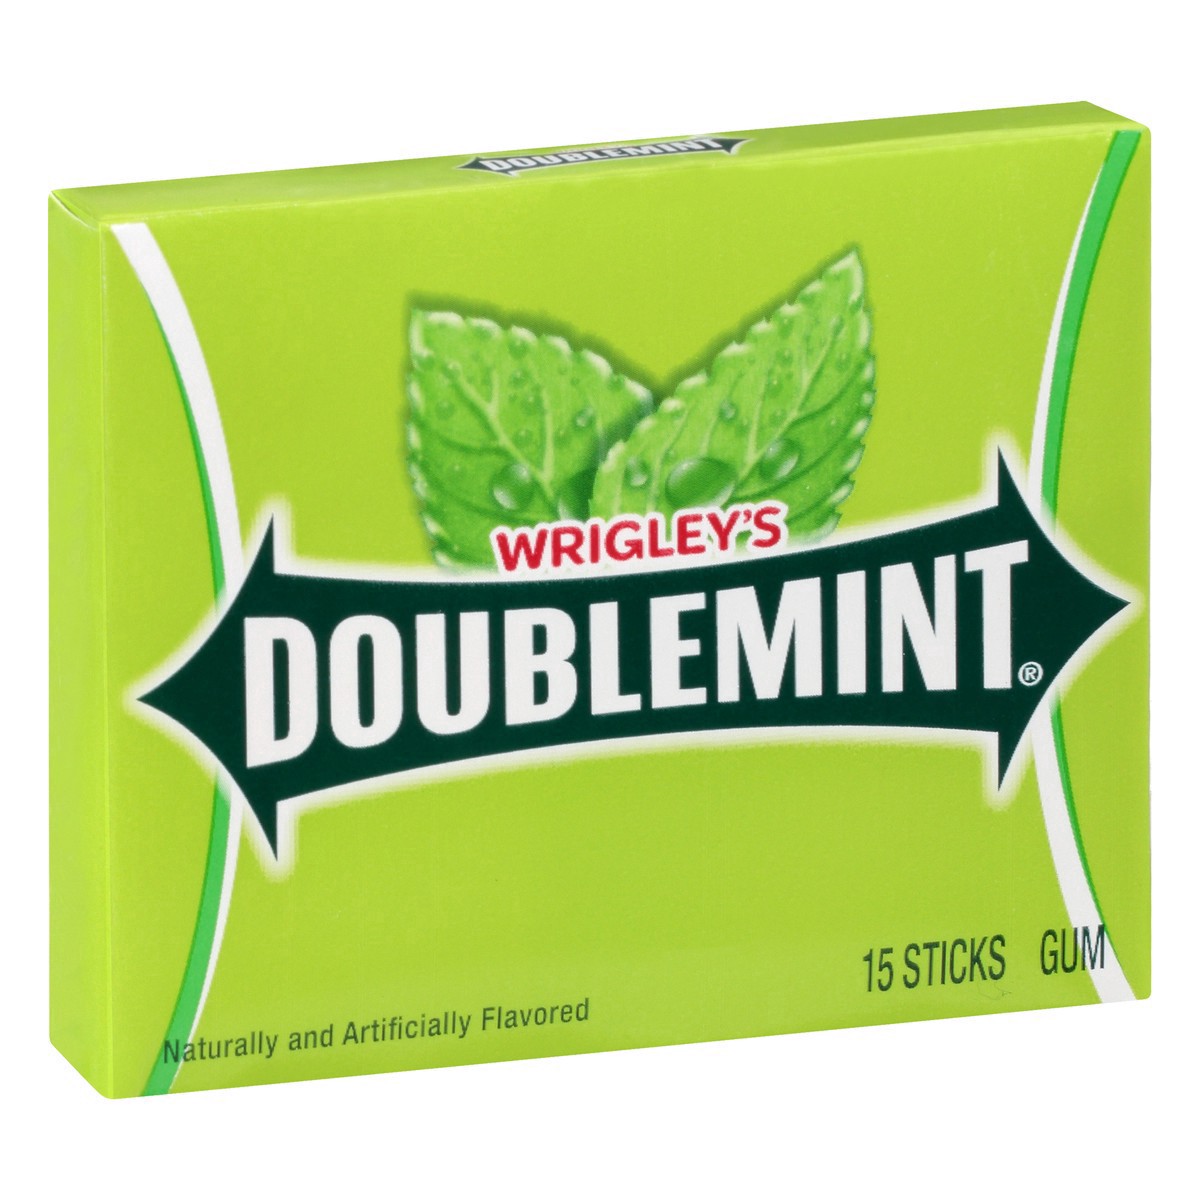 slide 6 of 11, Doublemint Wrigley's Doublemint Chewing GumSingle Pack, 